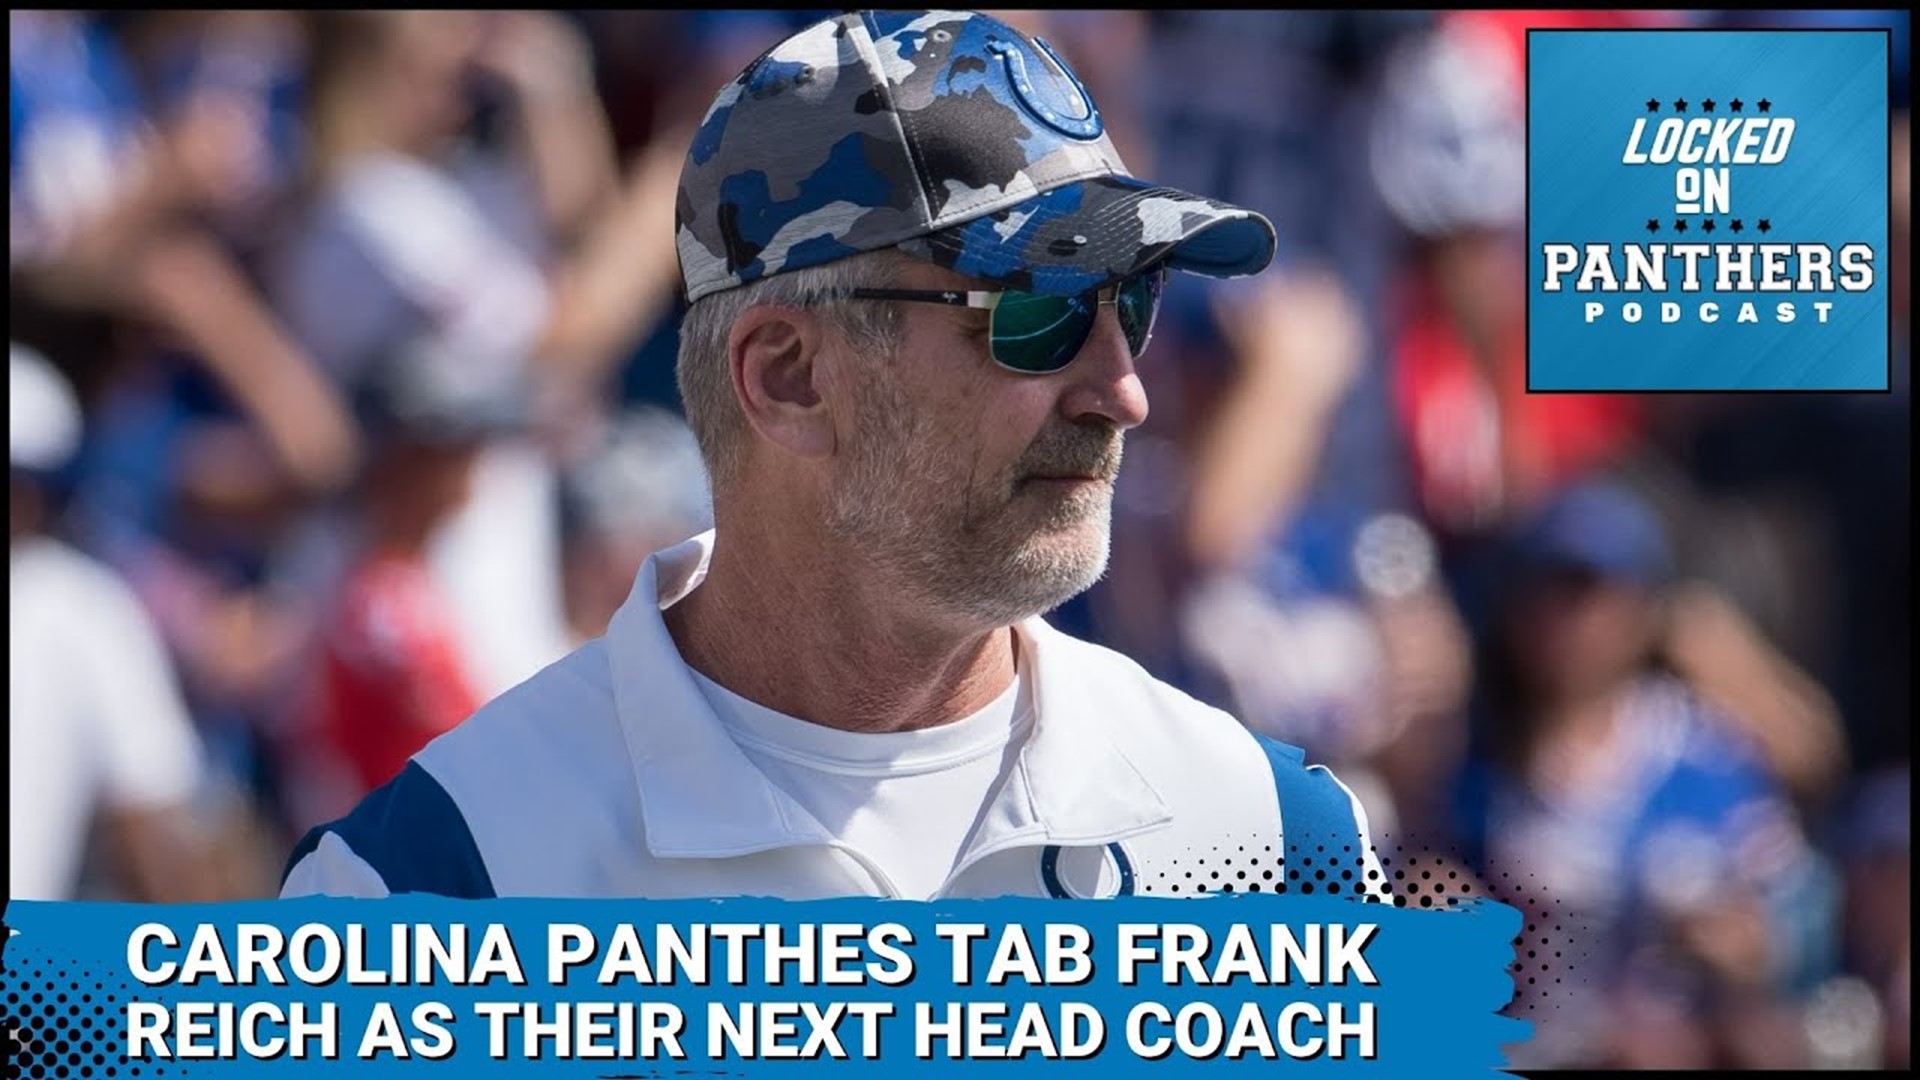 Panthers announced on Thursday that they hired former Indianapolis Colts head coach and the first quarterback in franchise history Frank Reich as head coach